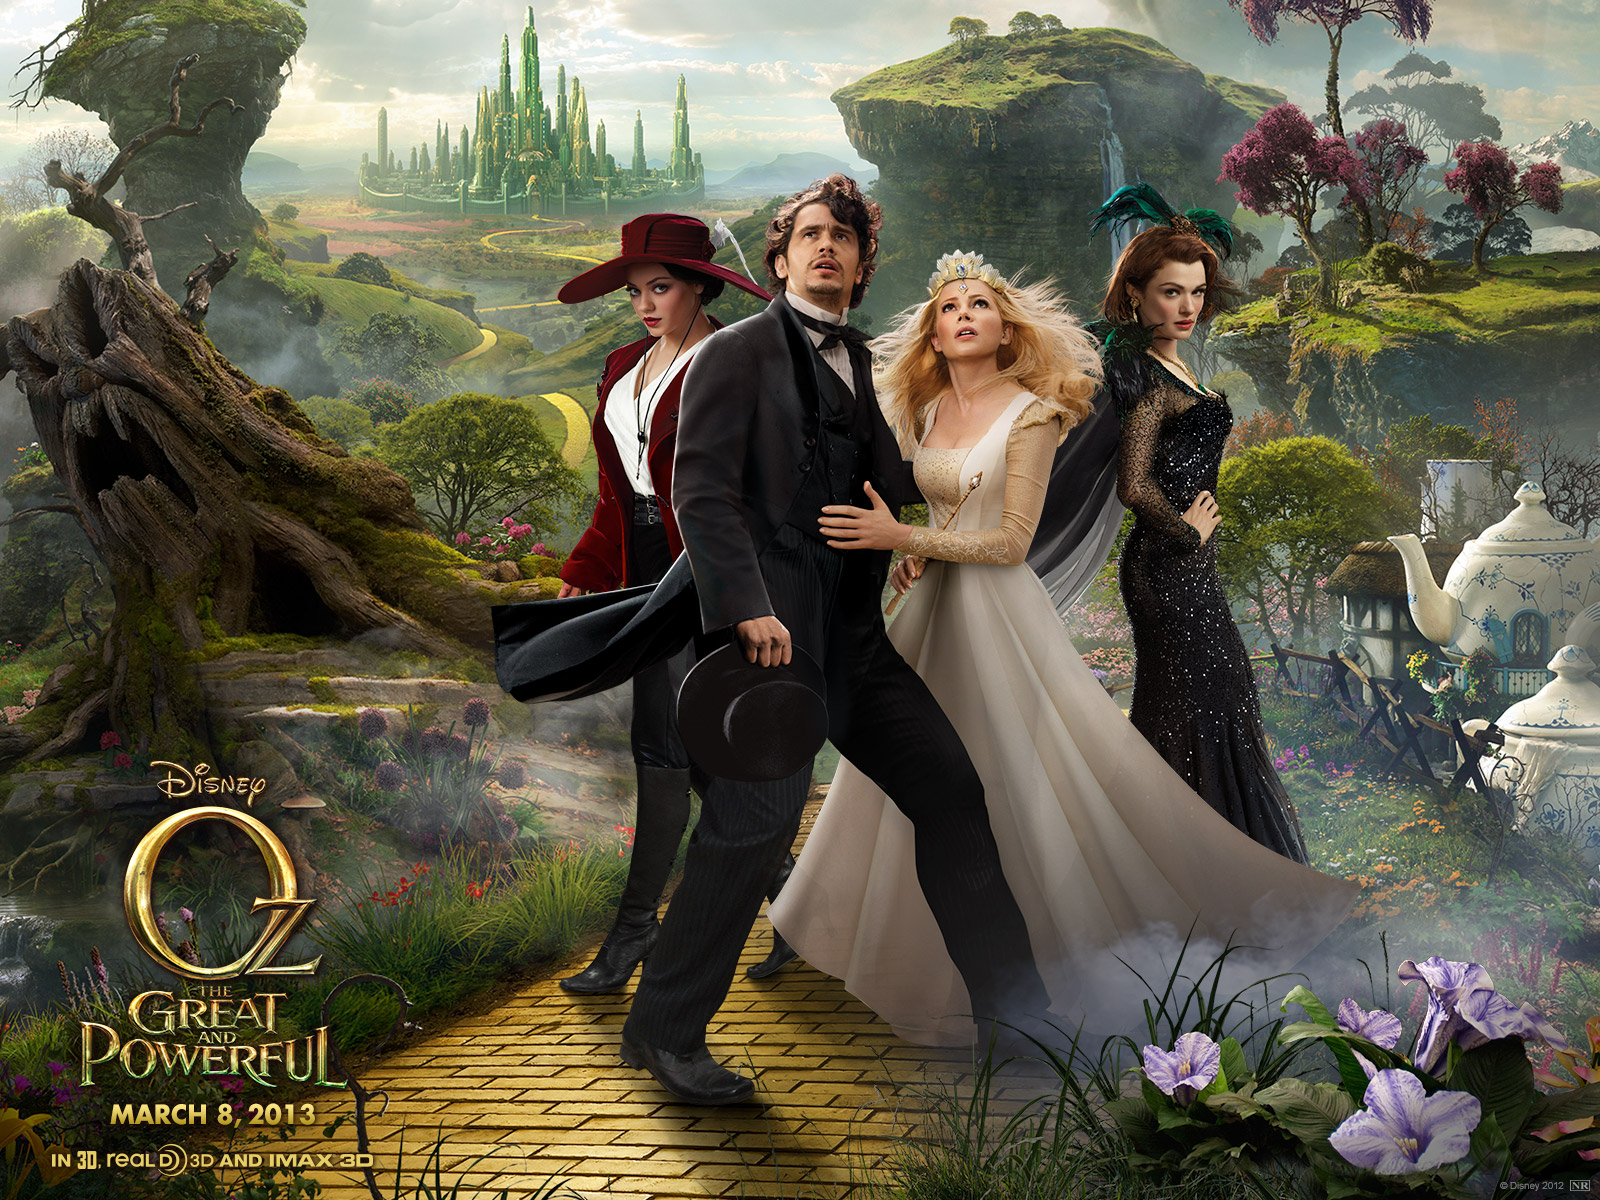 Download full size Oz The Great and Powerful wallpaper / Movies / 1600x1200